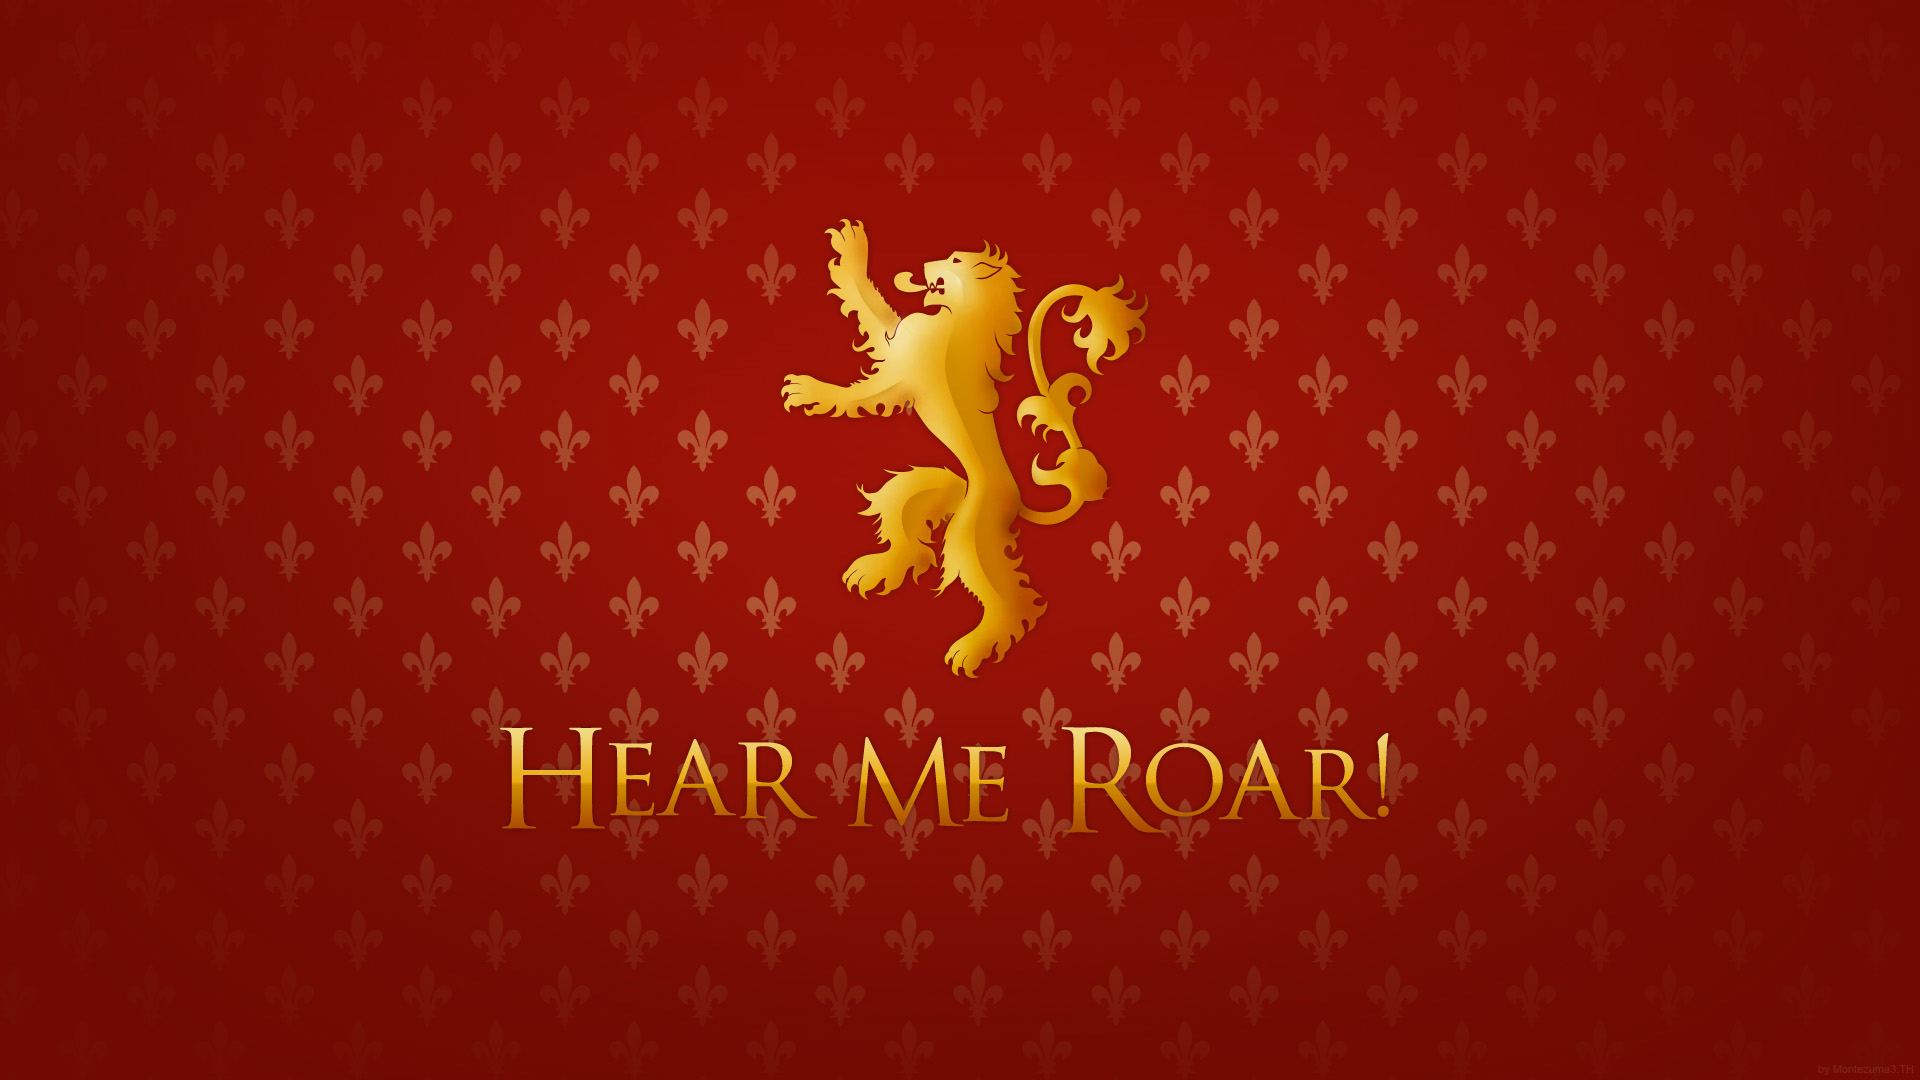 House Lannister images House Lannister HD wallpaper and background